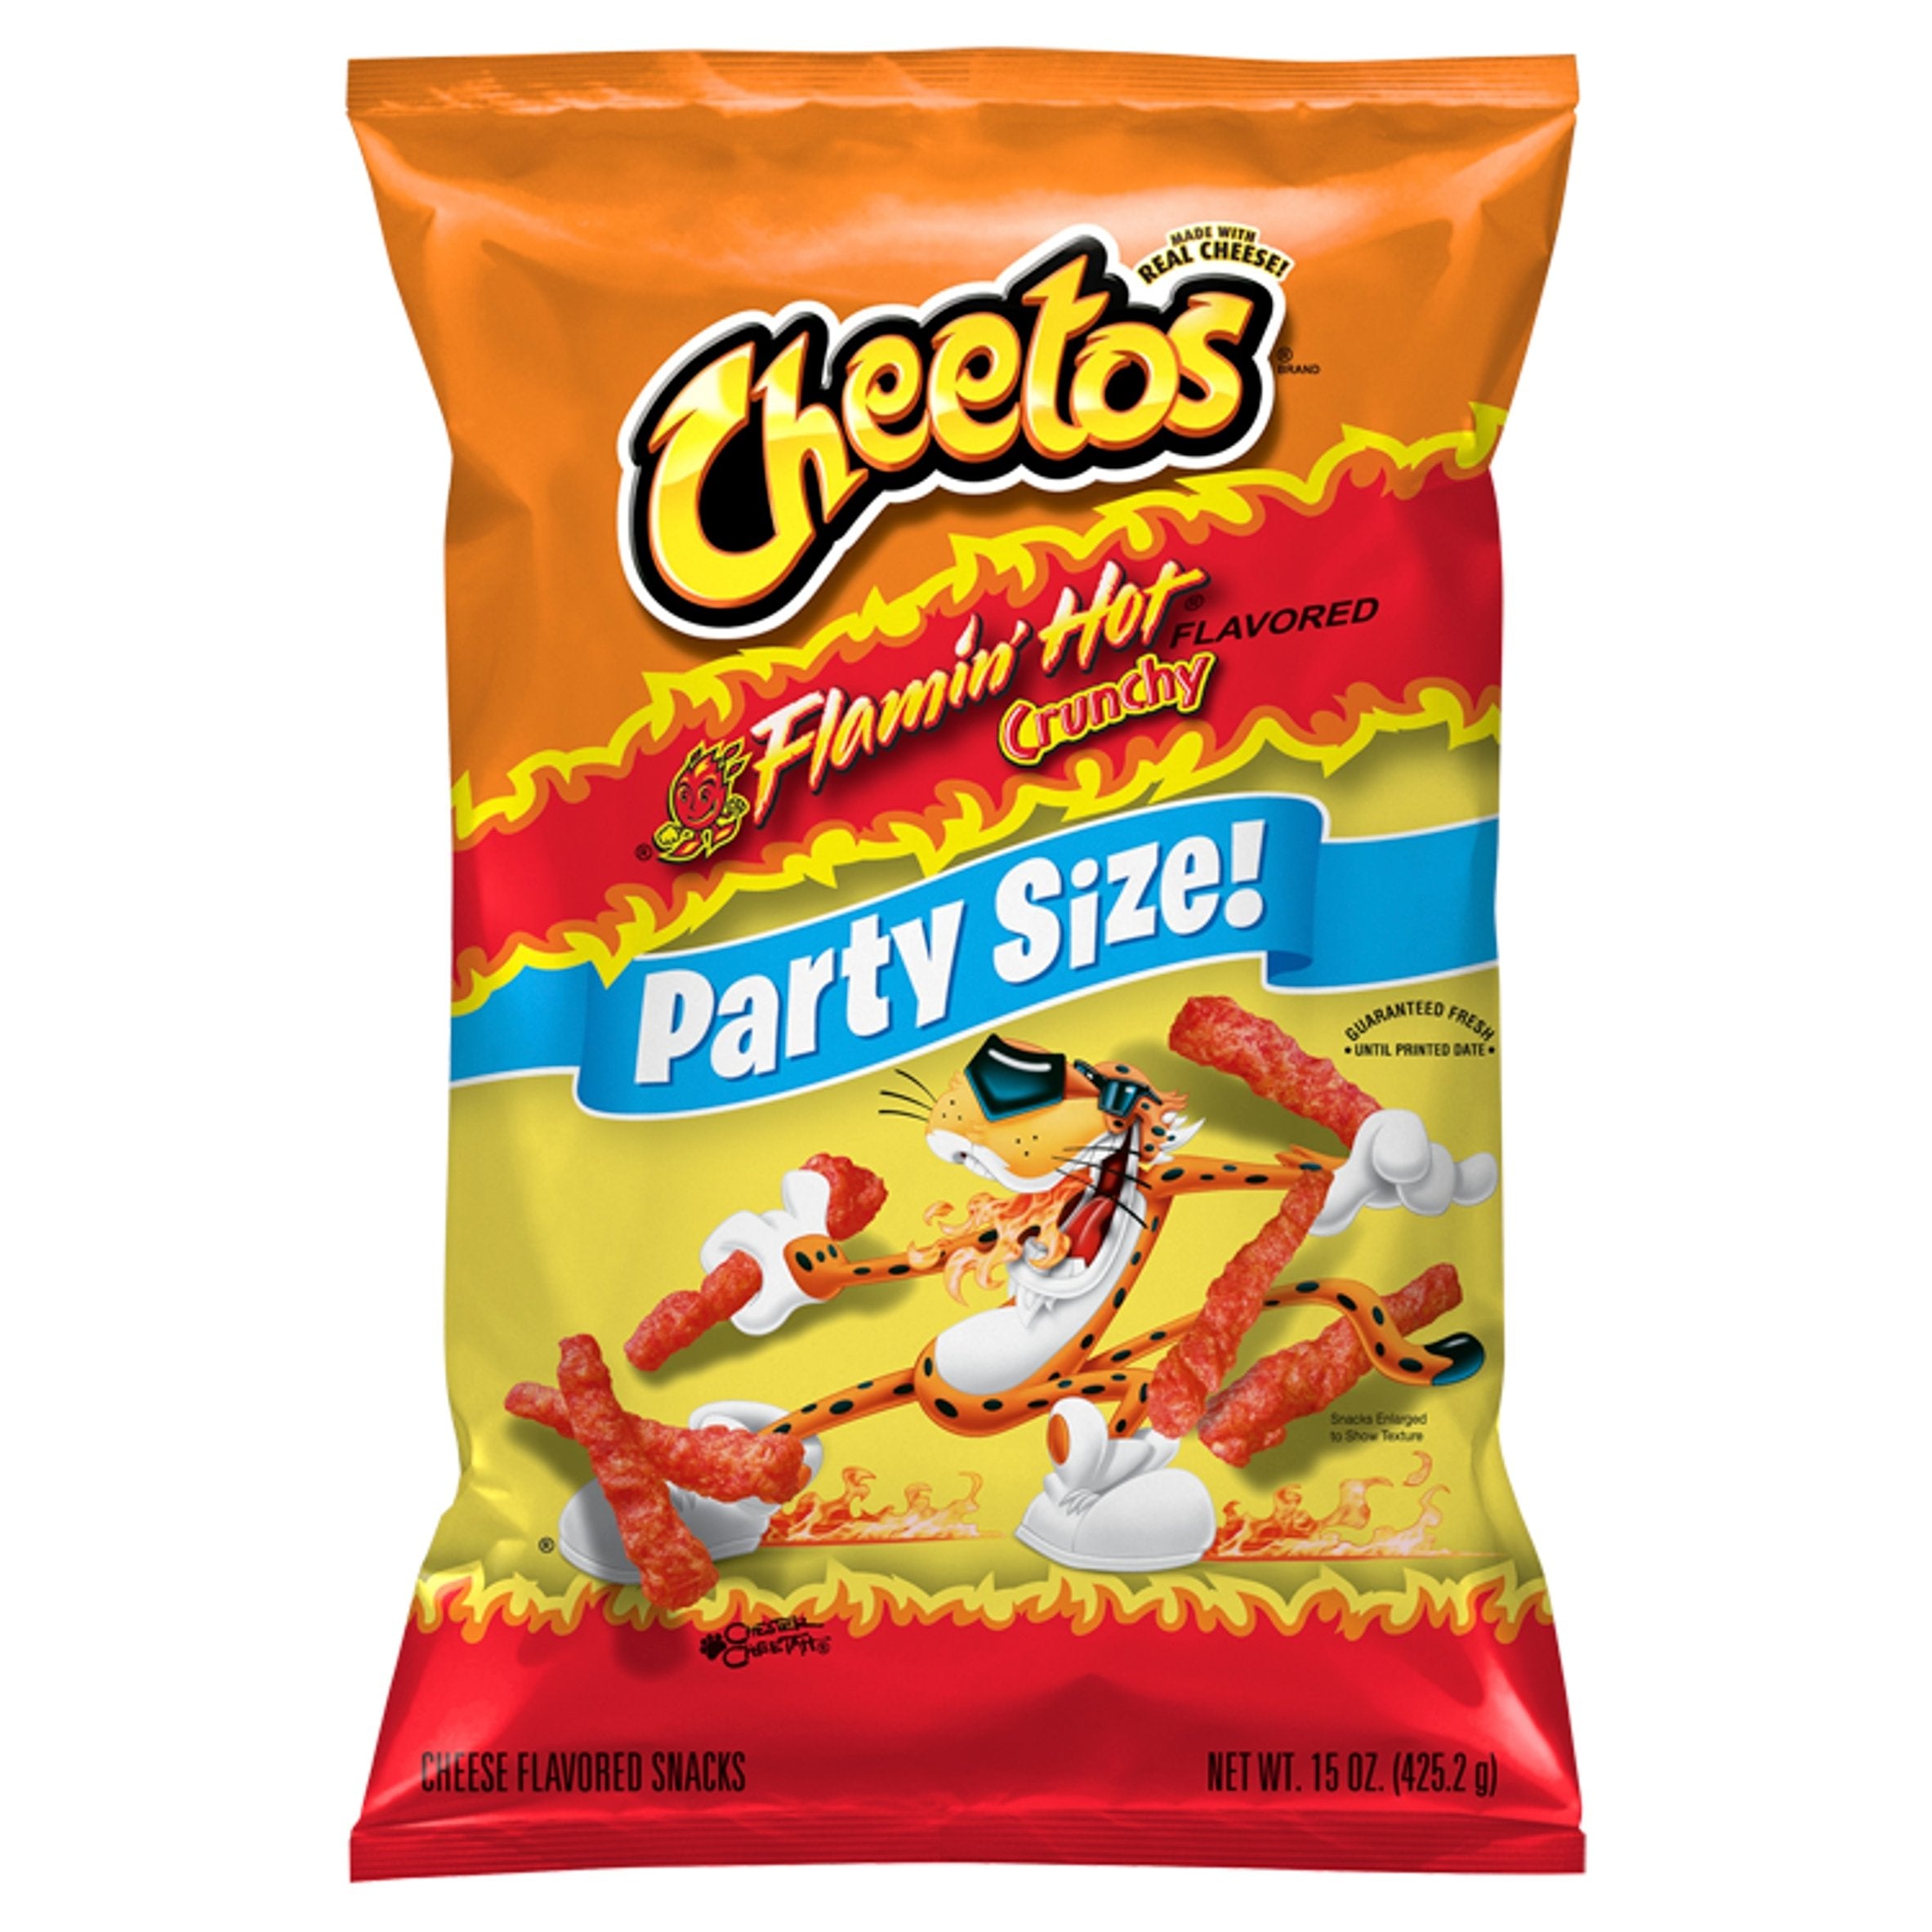 Cheetos Flamming Hot Crunchy Party Size